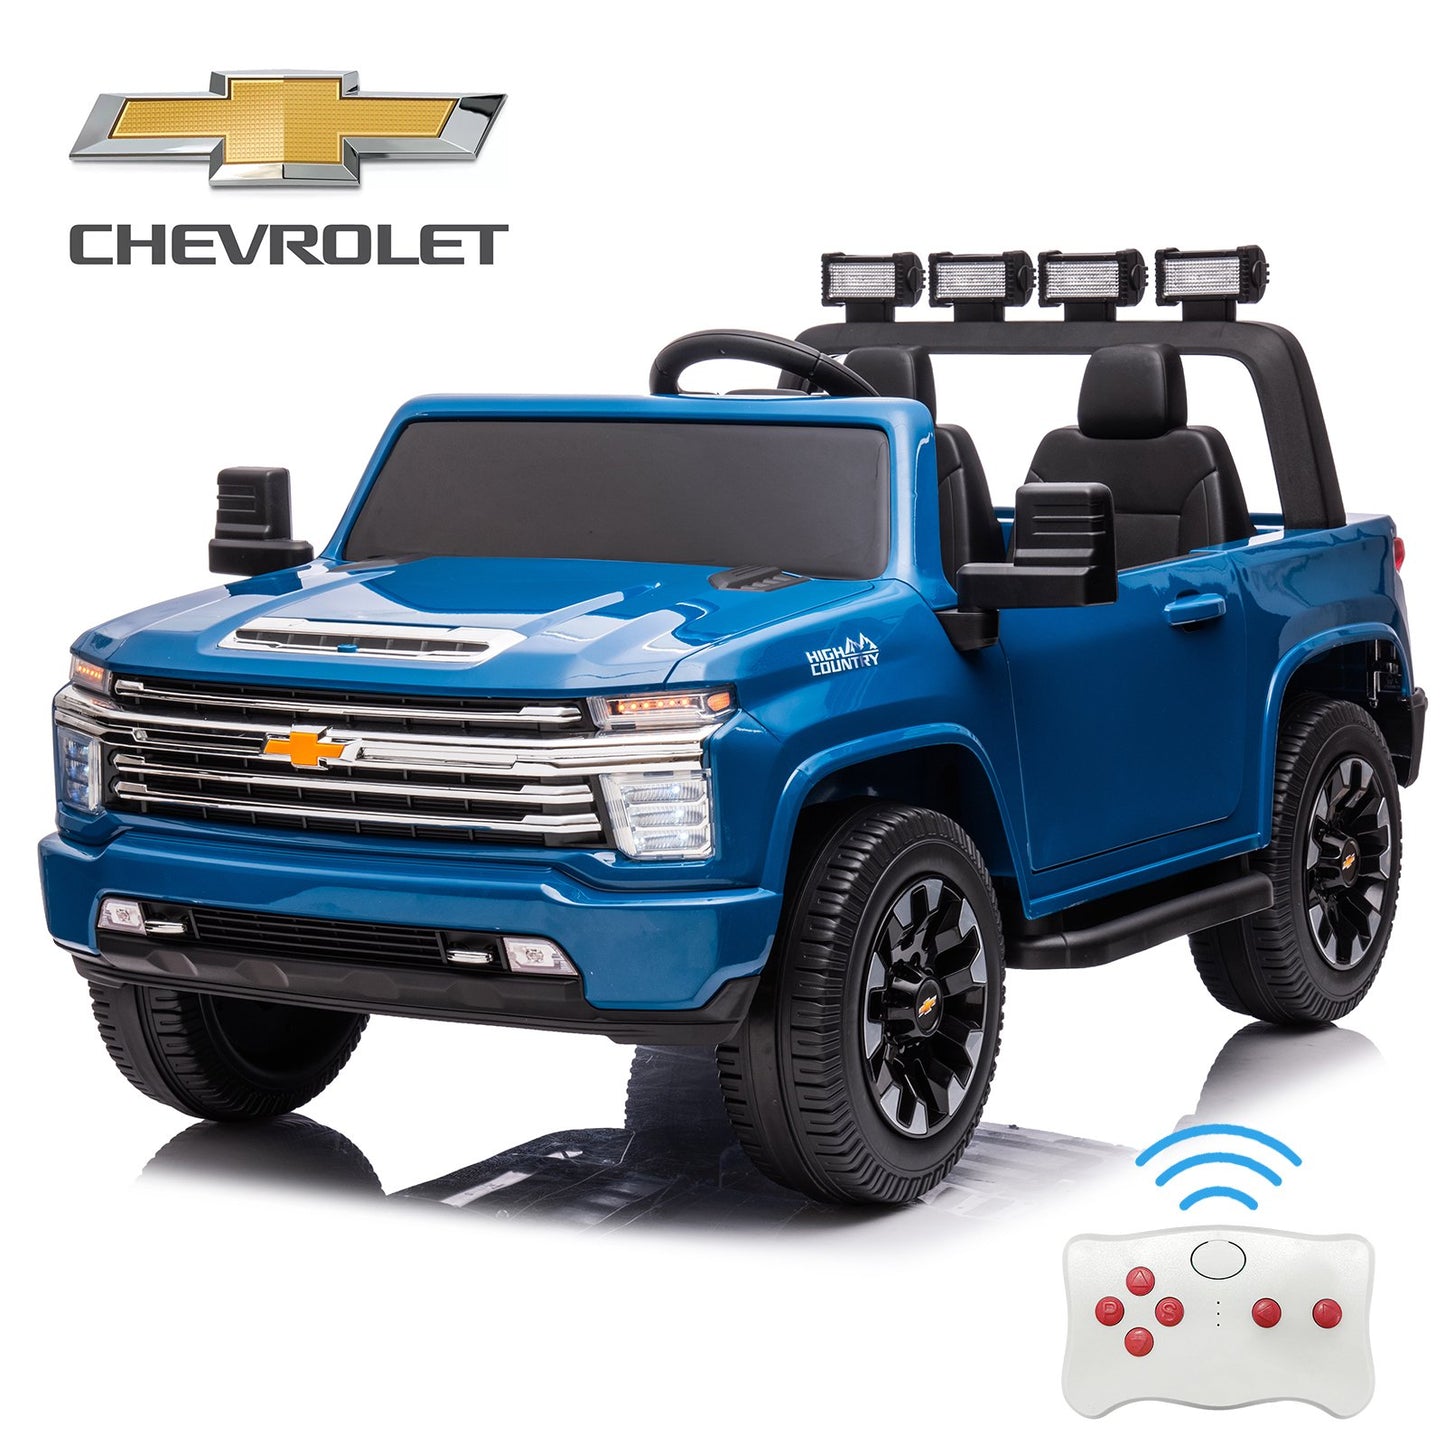 iYofe SILVERADO 12V Battery Powered Car Toy for Girls Boys, Kids Ride on Car for 3 4 5 Yrs with 2 Seats, Remote Control, LED Lights, MP3, Seat Belt, Electric Truck for Kids Birthday Gift, Blue